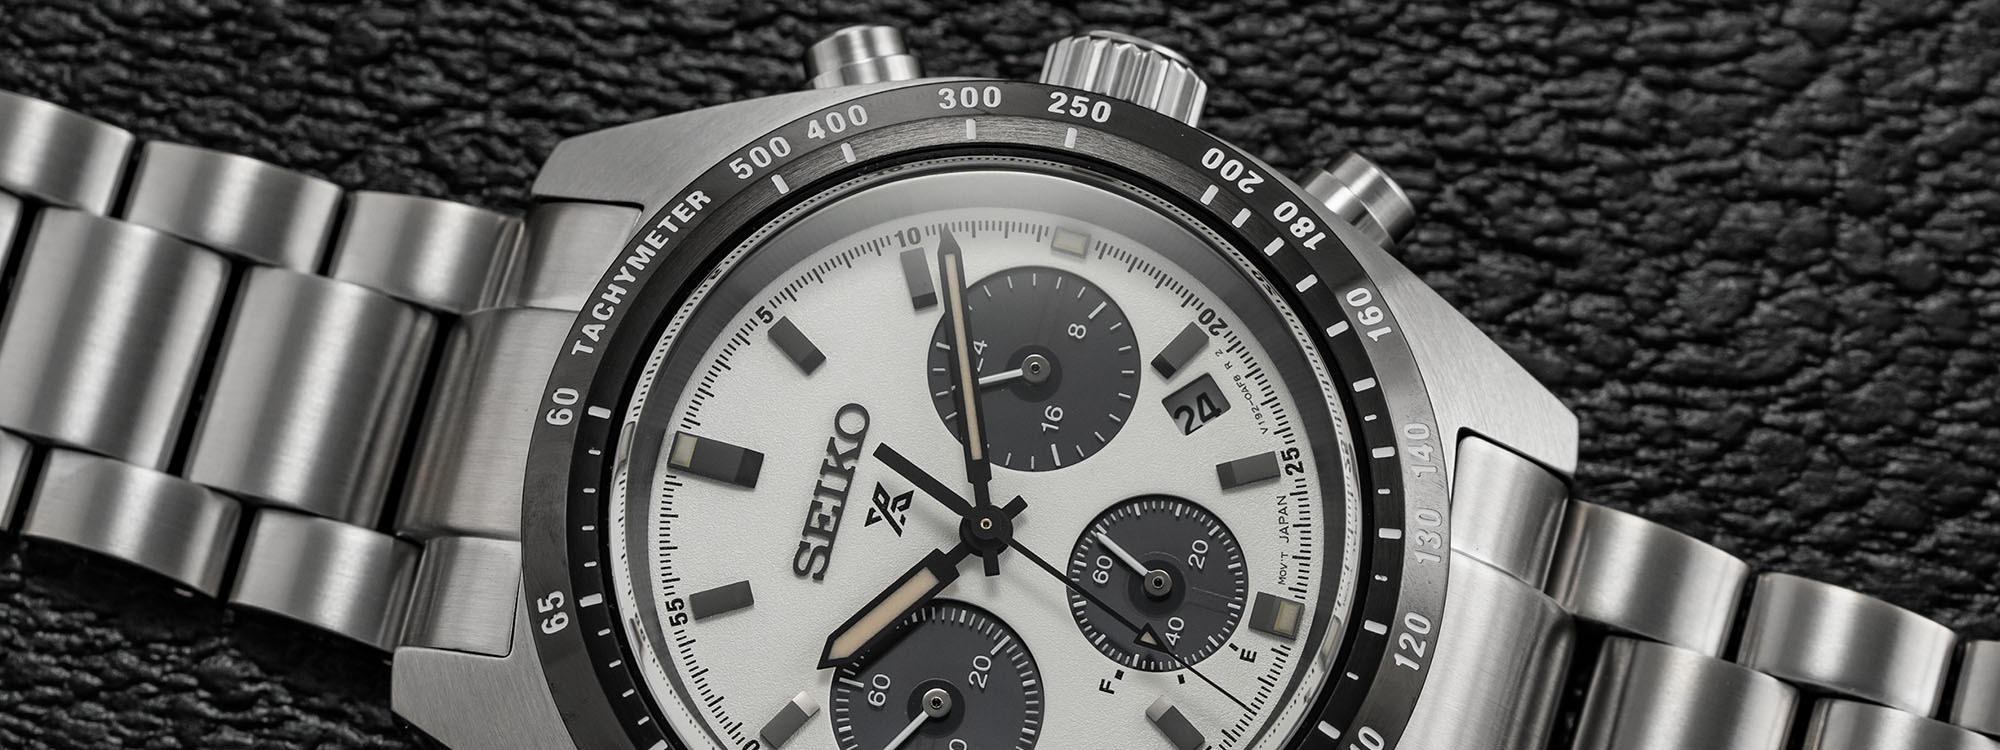 Watches with Tachymeters: How They Work and Our 15 Top Tachymeter Watches